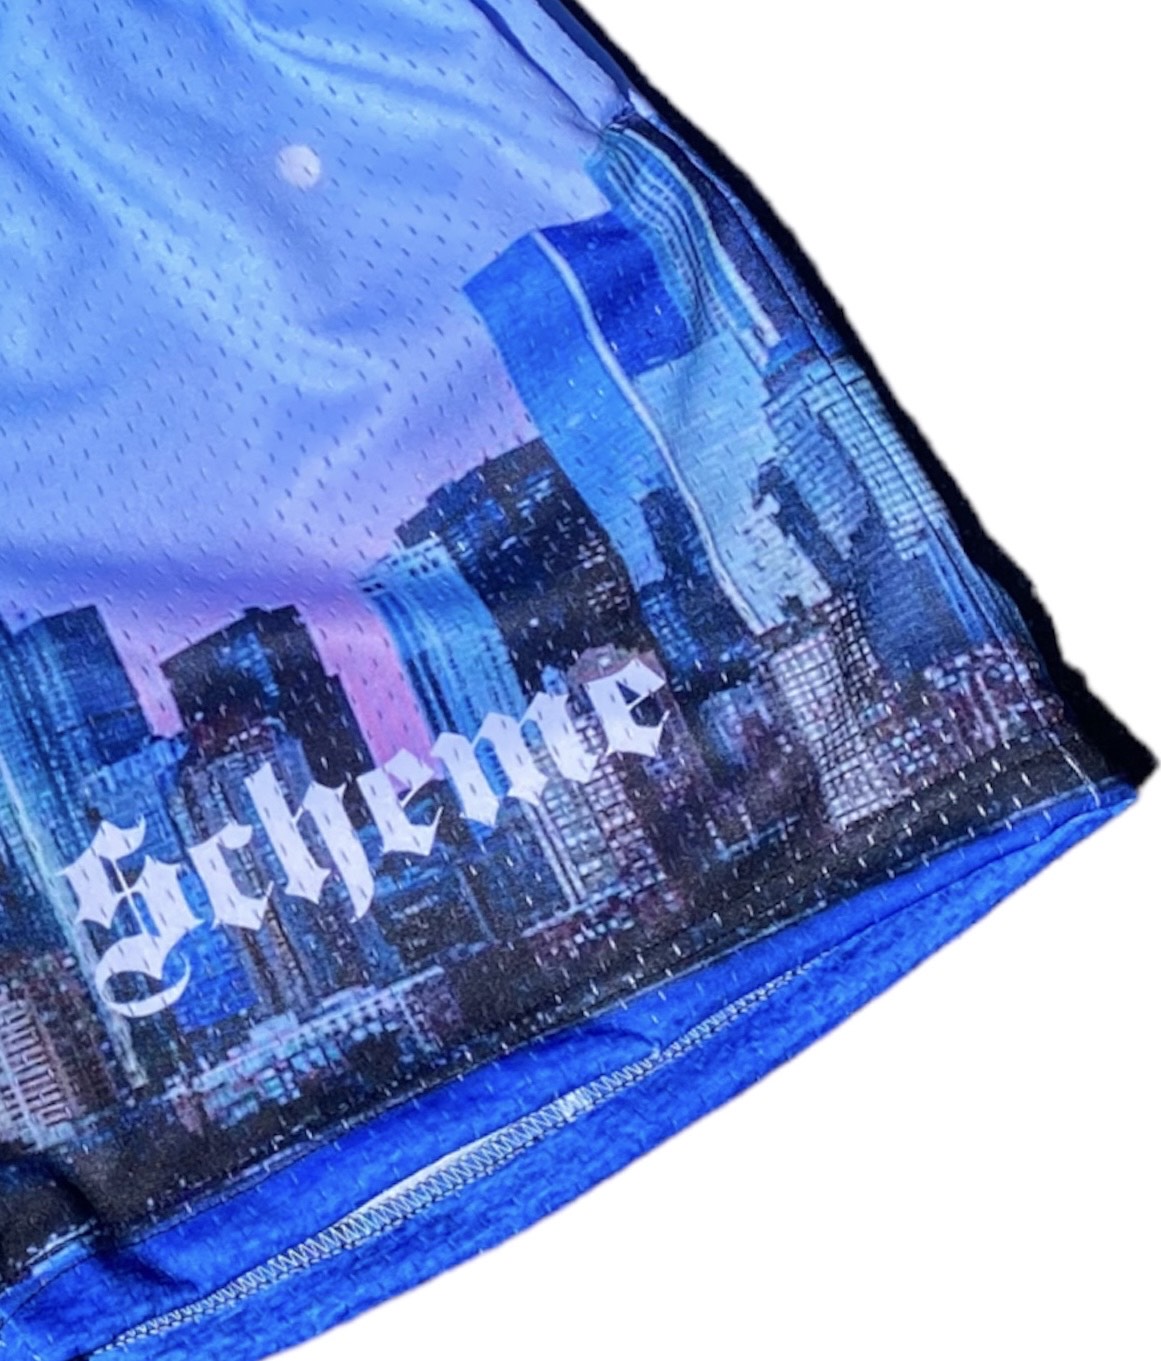 Men's graphic mesh shorts with a picture of nyc skyline